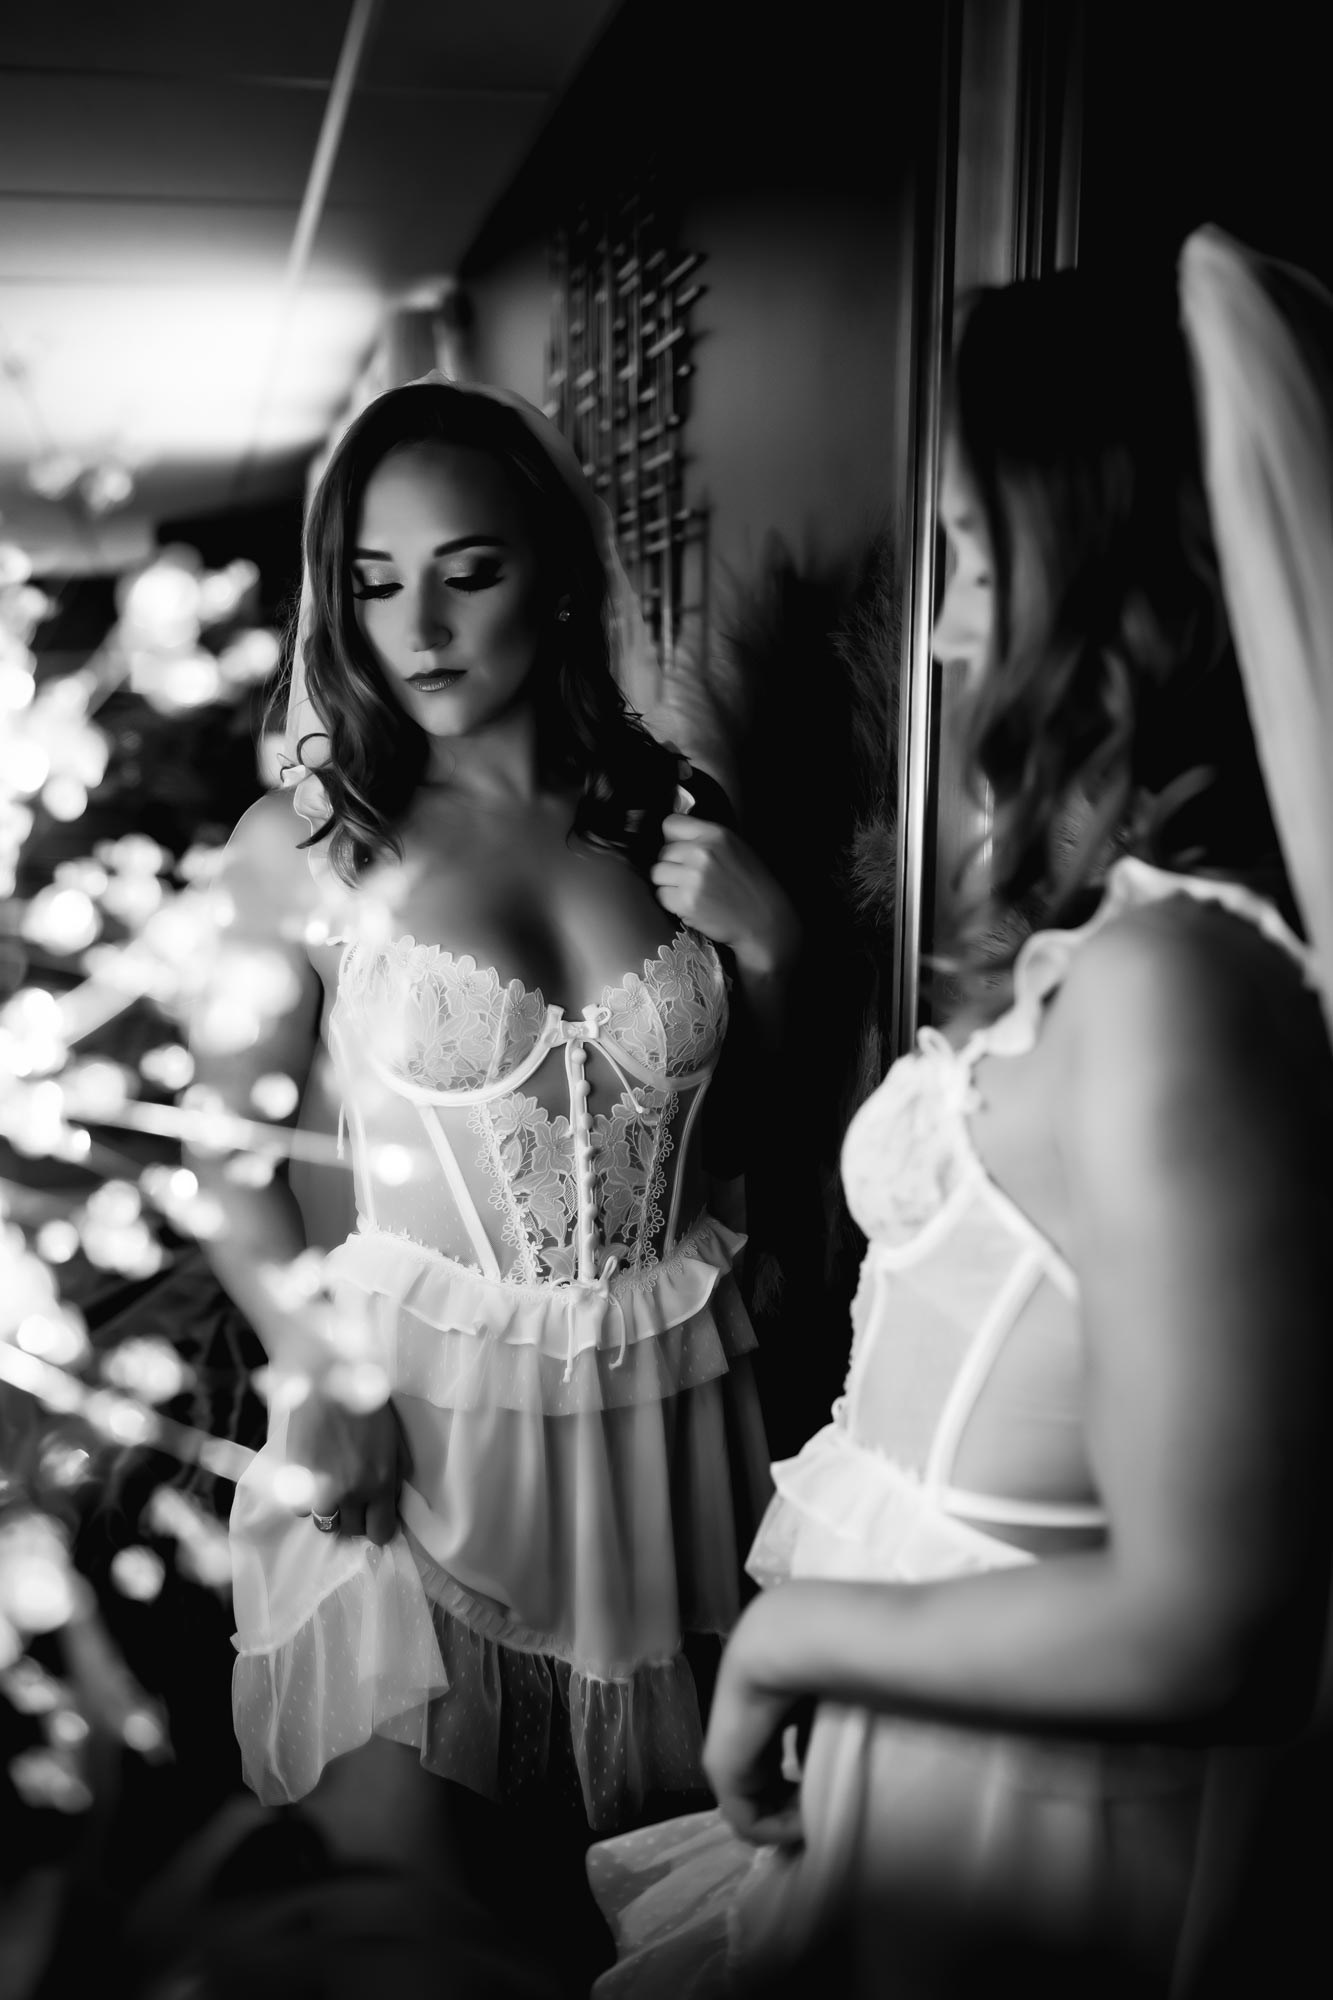 black and white image of woman in lingerie for her wedding